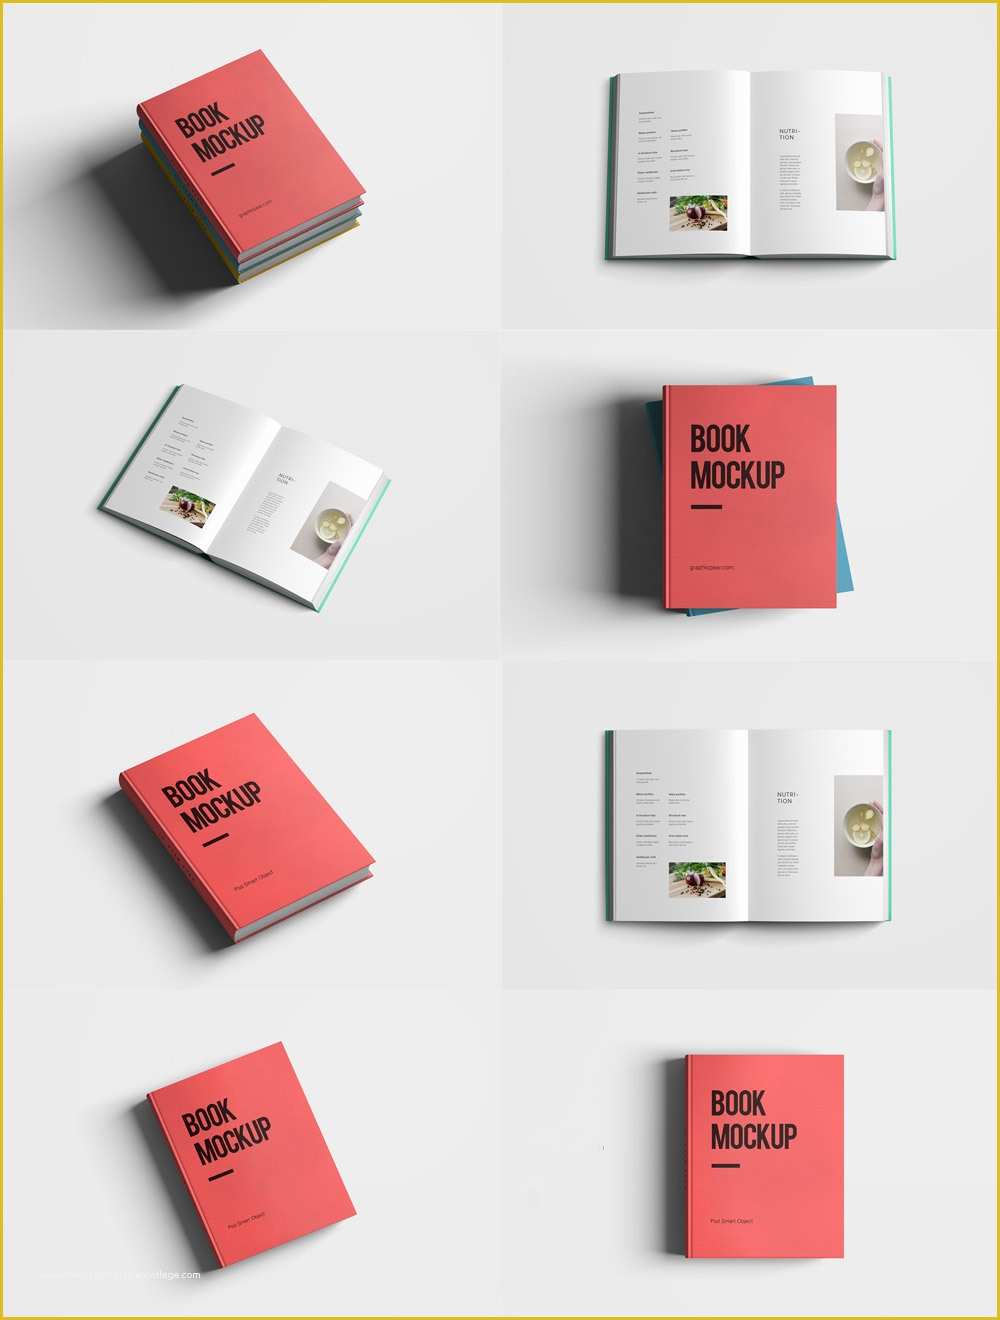 Free Mockup Templates Of Realistic Book Mockup Template Pack Free Psd Download